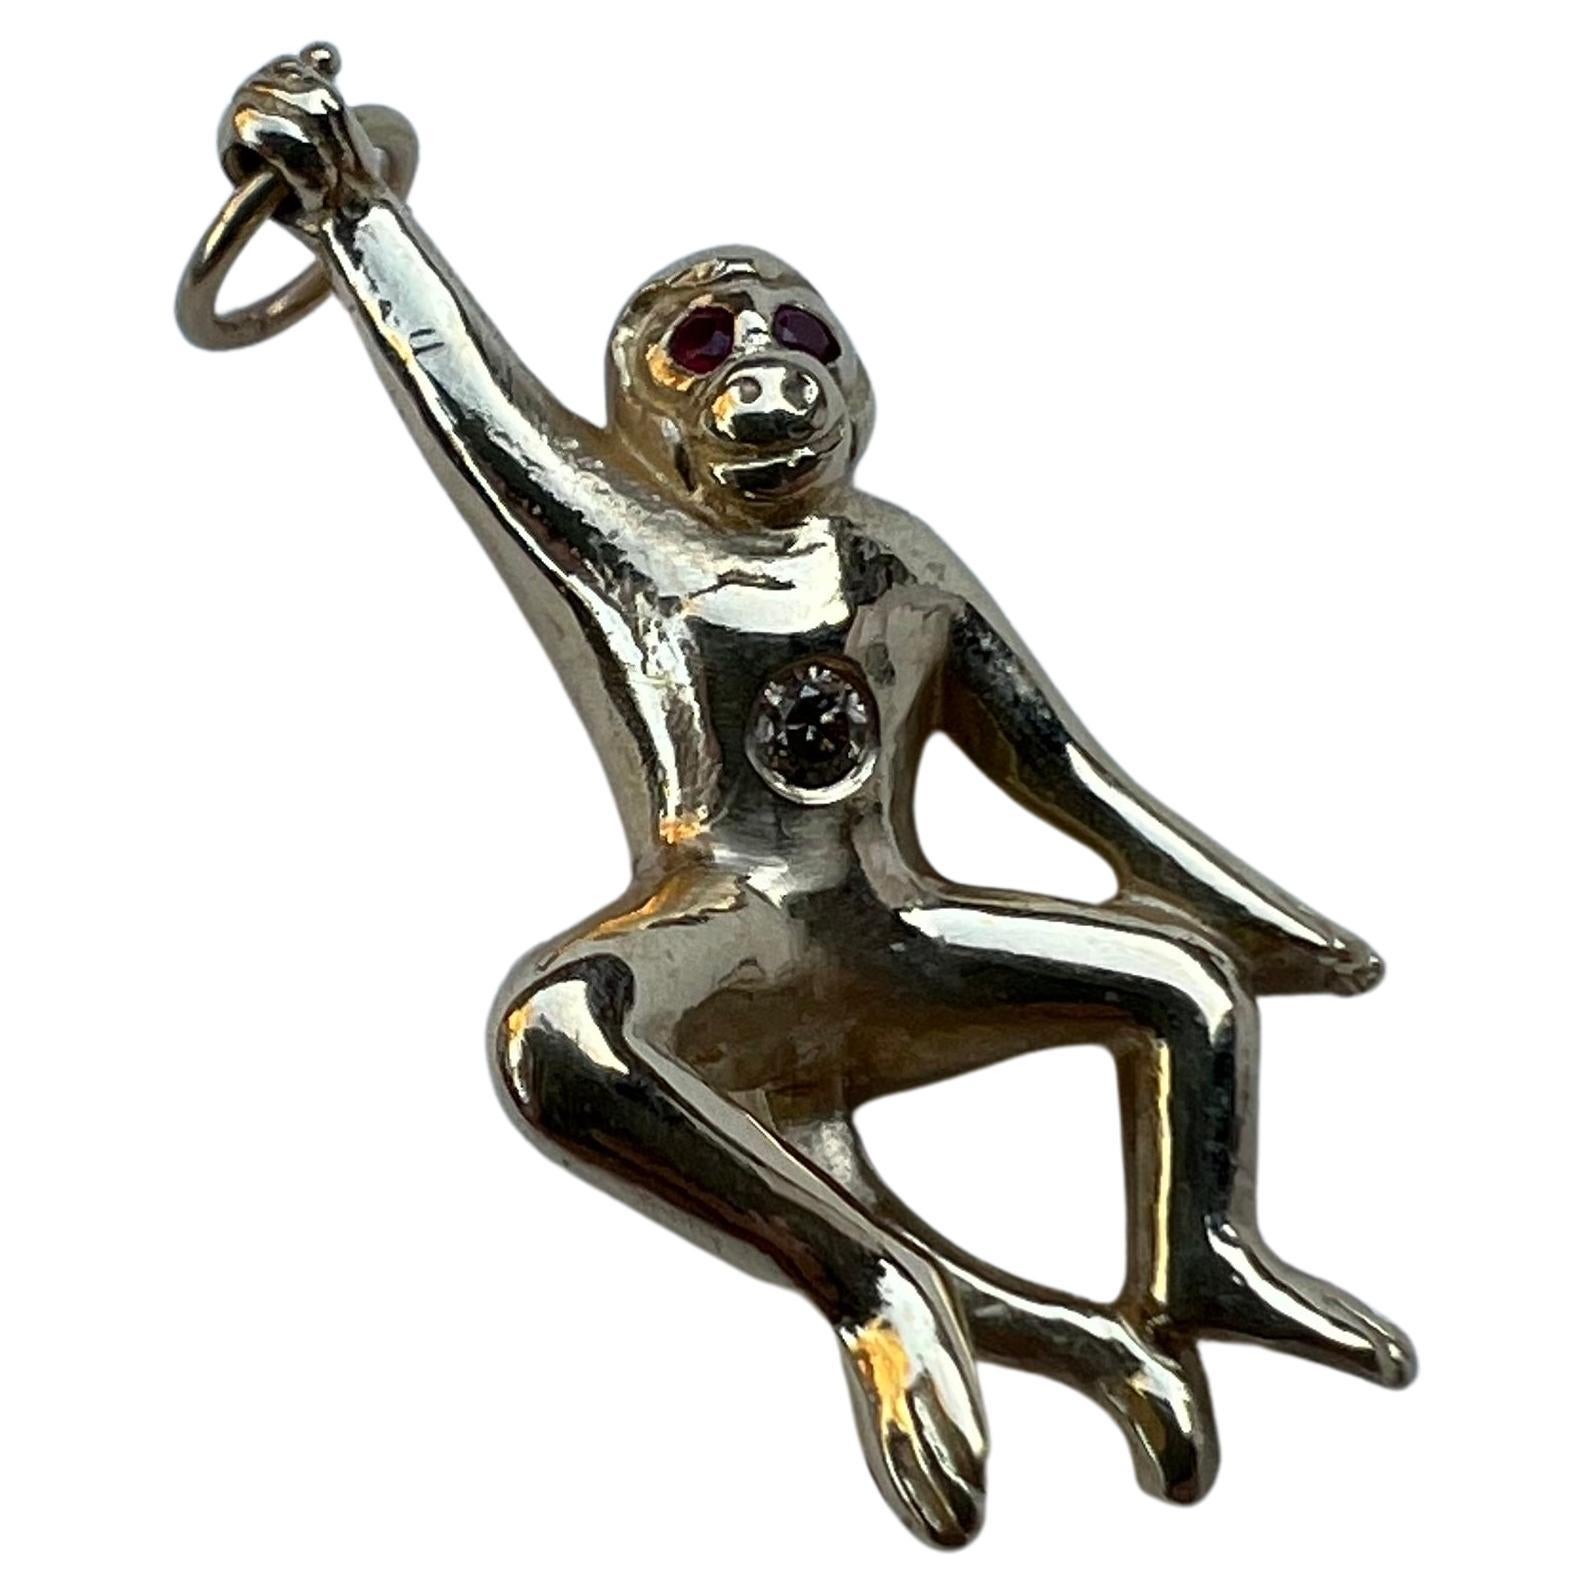 Diamond Tummy Ruby Eyes Monkey 14k Solid Gold Pendant By Designer J Dauphin

Hand made in Los Angeles

Can be worn on a chain necklace or bead necklace. Can used as a pendant on either a long necklace or a choker.